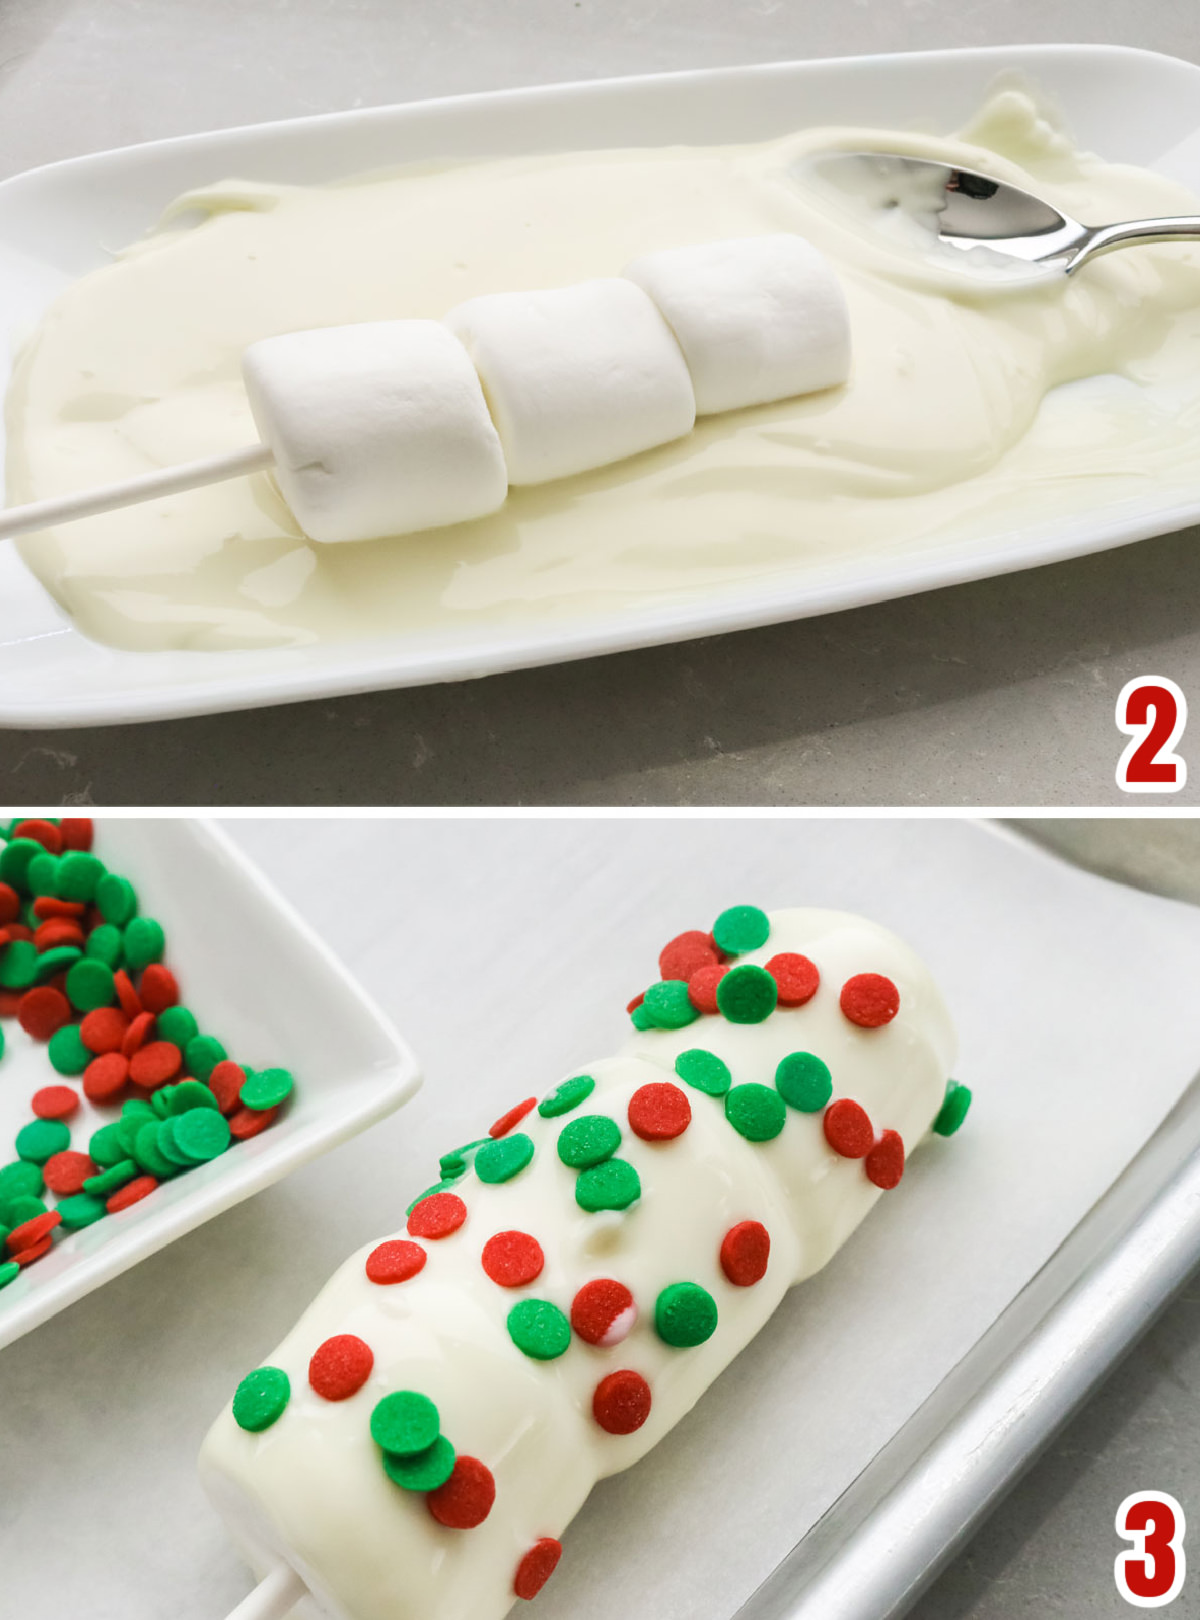 Collage image showing the steps for covering the marshmallow pops with white chocolate and sprinkles.